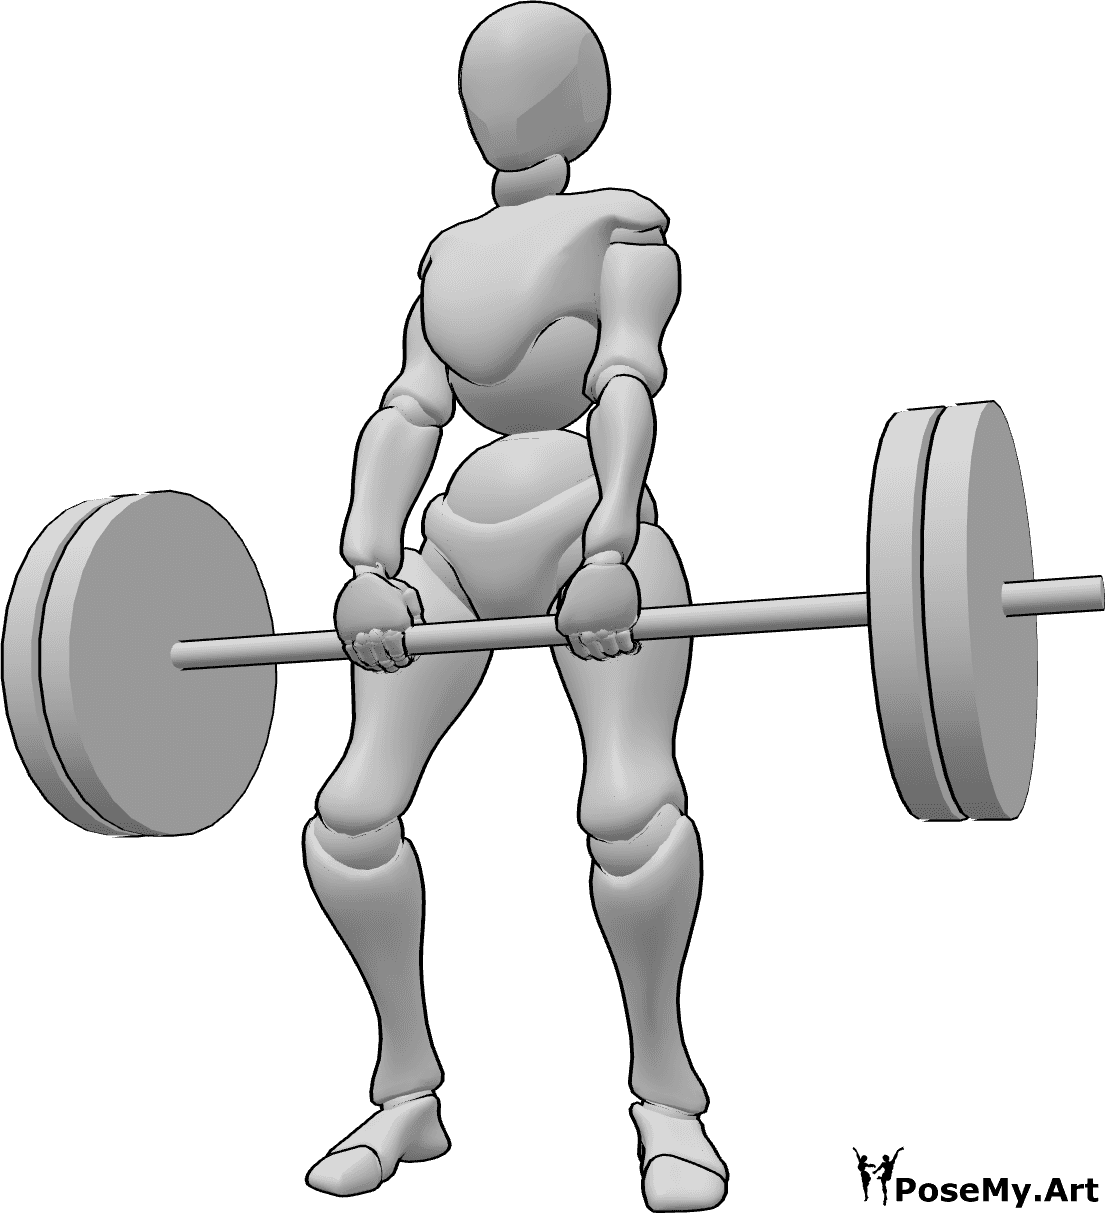 Pose Reference- Female heavy weights pose - Female bodybuilder is lifting heavy weights with two hands